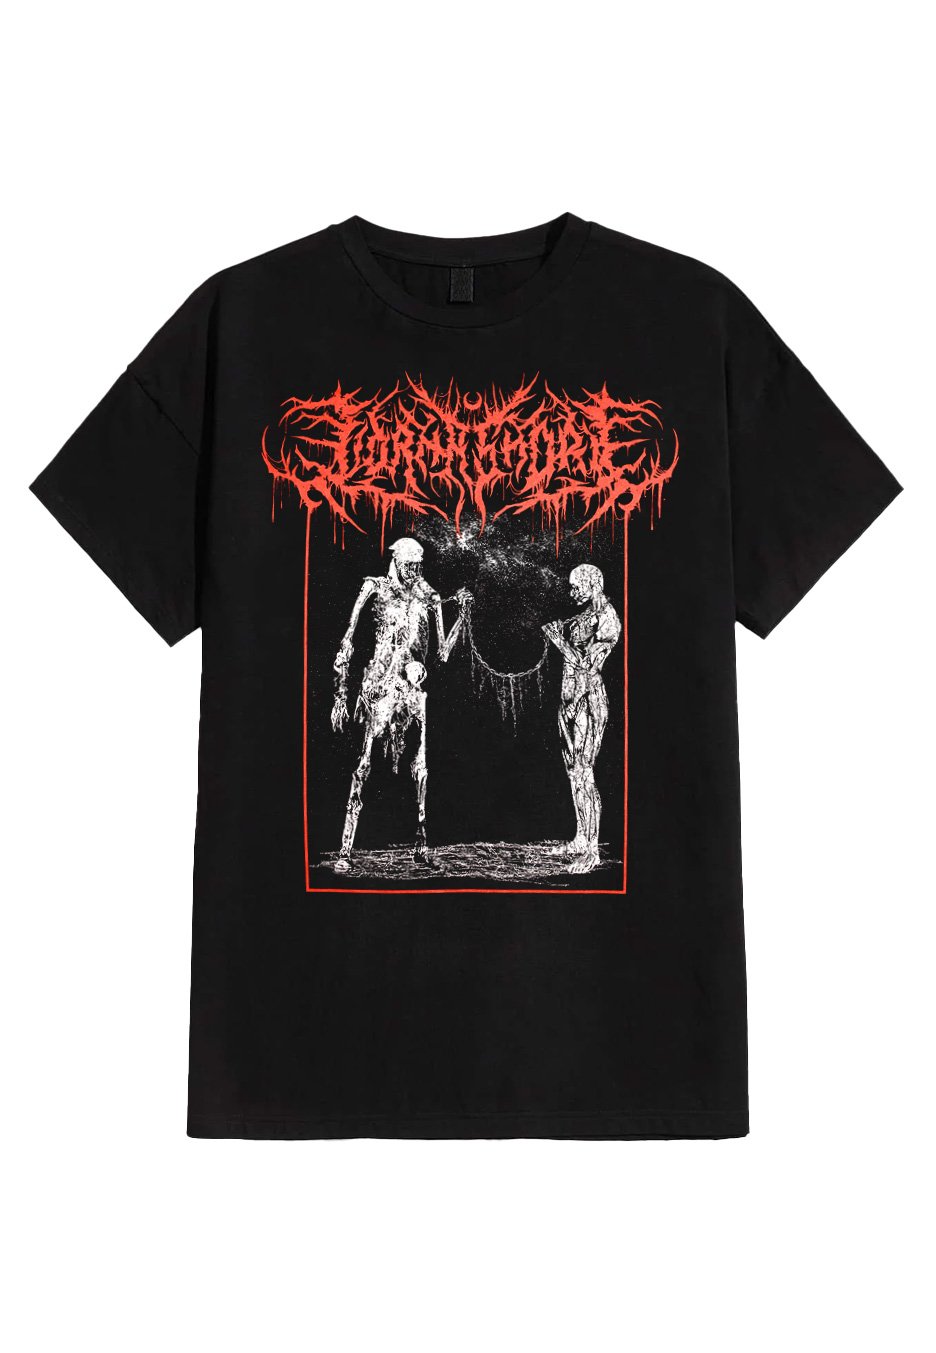 Lorna Shore - In Chains - T-Shirt